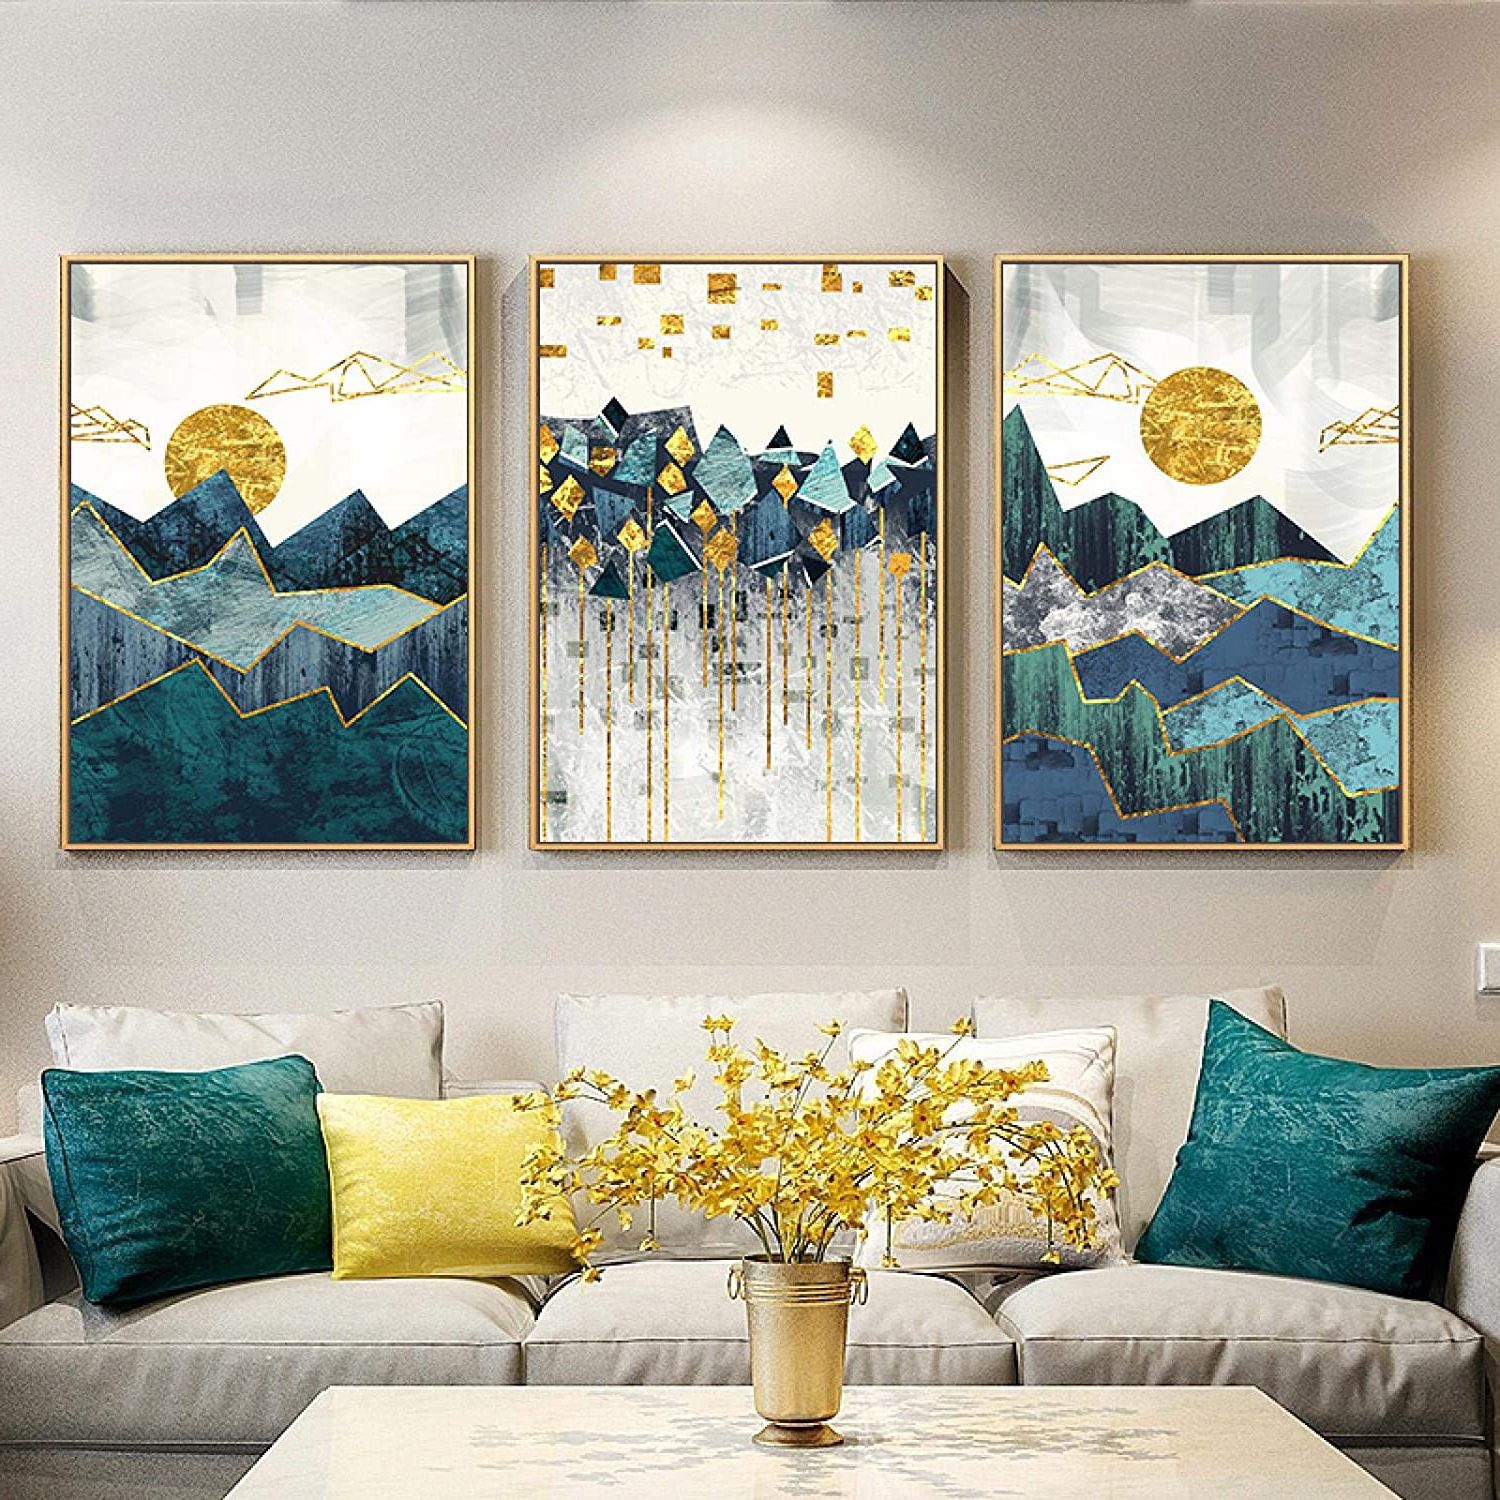 Poster Print Wall Art In Widely Used Canvas Wall Painting Art Abstract Geometric Mountain Landscape Wall Art  Canvas Painting Golden Sun Art Poster Print Wall Picture For Living Room  Unframed 3 Piece Set 50 * 70cm : Amazon.co (View 2 of 15)